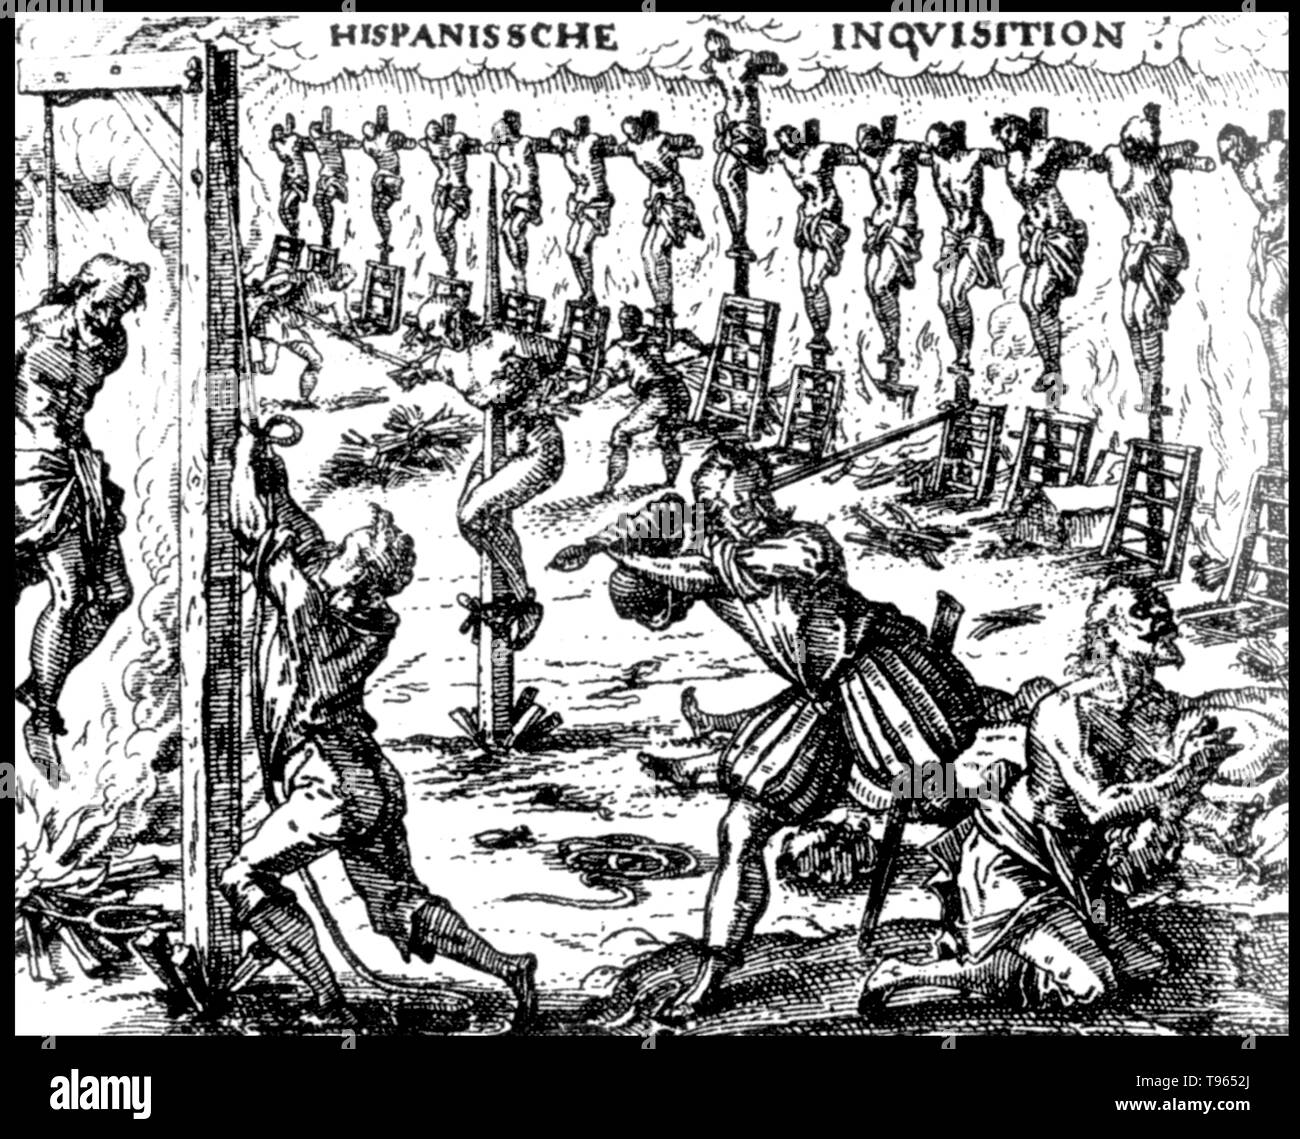 The Spanish Inquisition was established in 1480 by Catholic Monarchs Ferdinand II of Aragon and Isabella I. It was intended to maintain Catholic orthodoxy in their kingdoms and to replace the Medieval Inquisition, which was under Papal control. The Inquisition was originally intended primarily to ensure the orthodoxy of those who converted from Judaism and Islam. Stock Photo